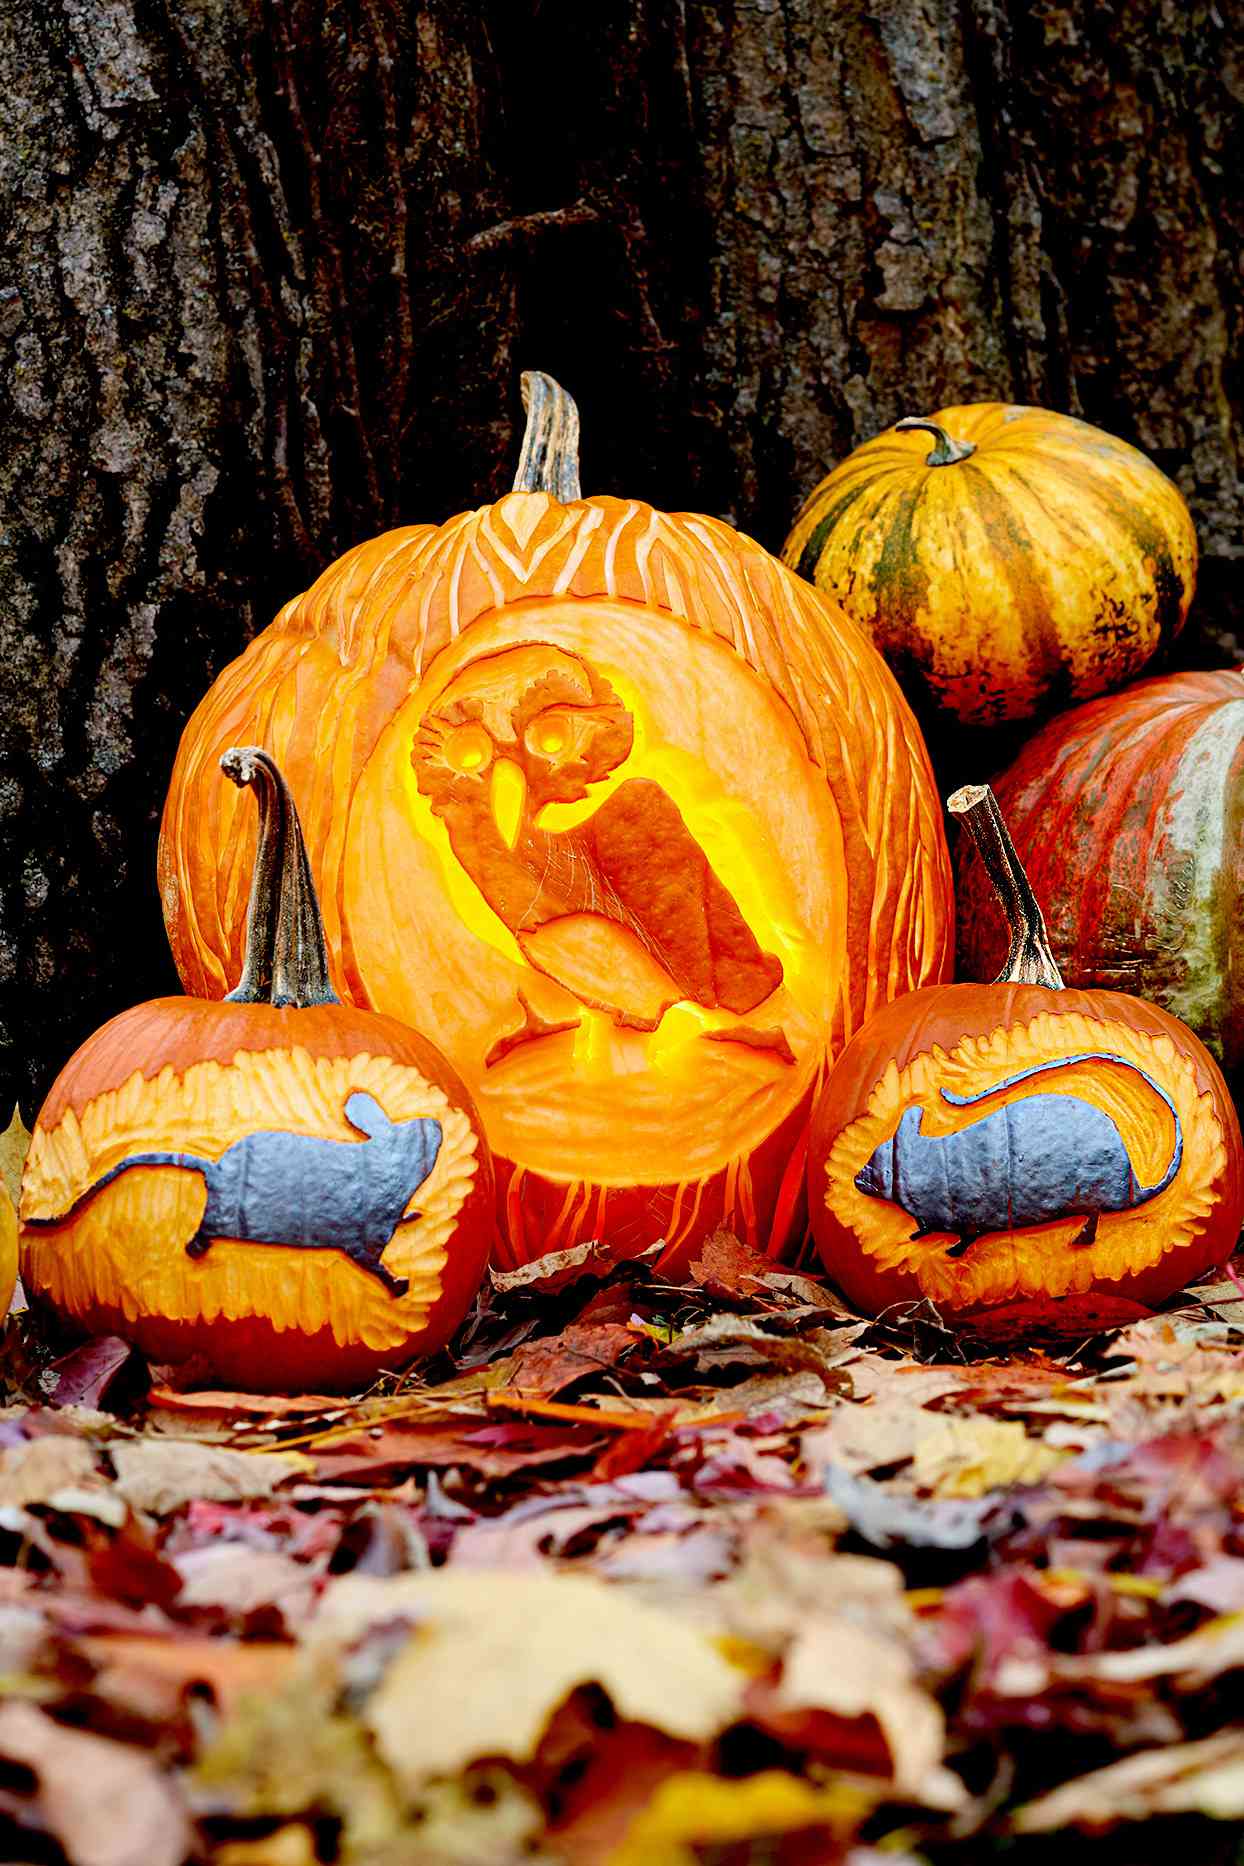 Pumpkins carved with owl and mice